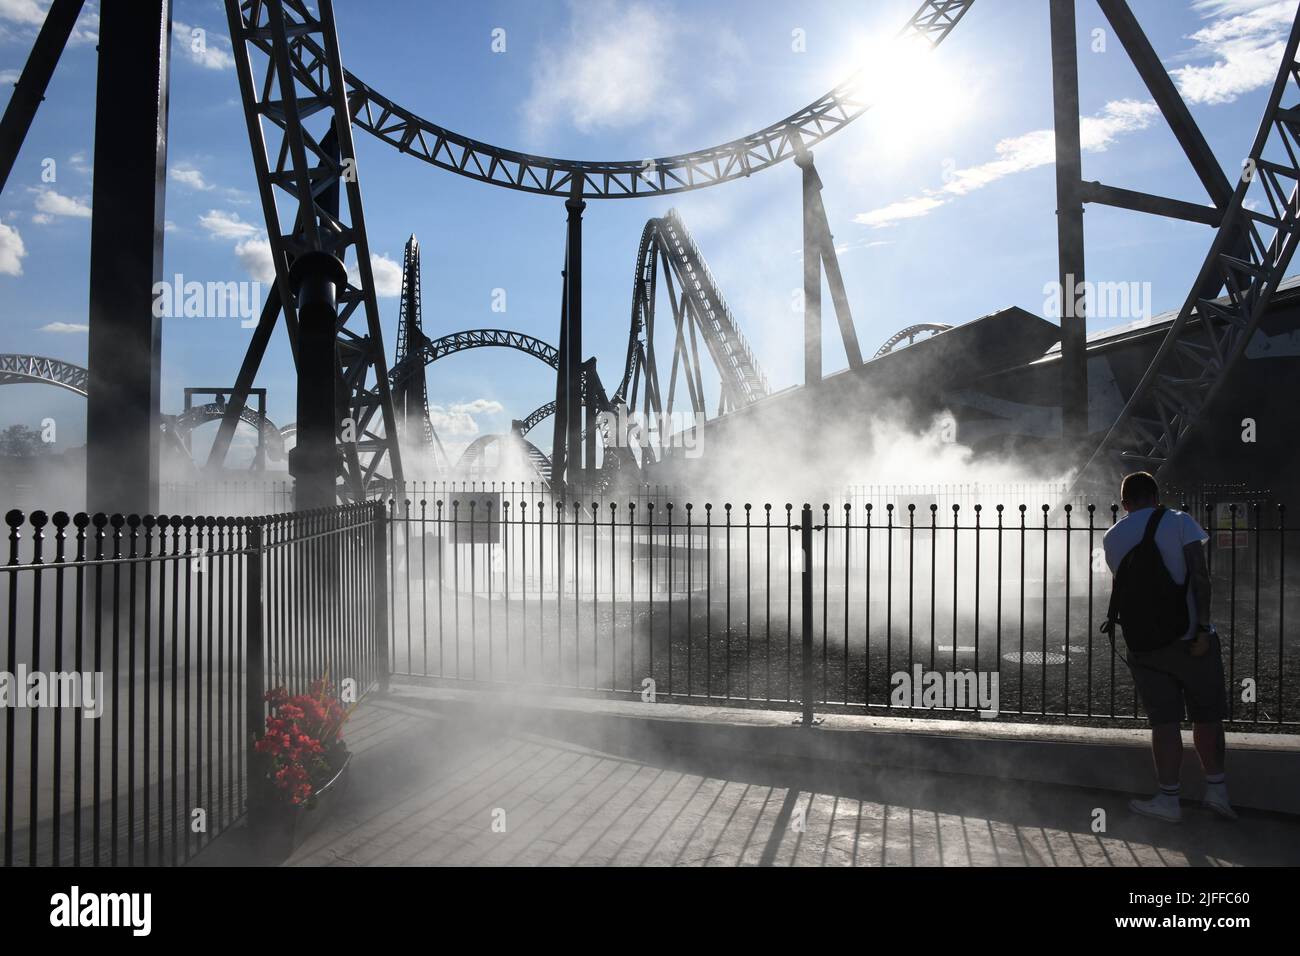 Thrill seekers try the new 10 looping ride 'Sik' at Flamingoland in Yorkshire. Credit: Thomas Faull/Alamy Live News Stock Photo